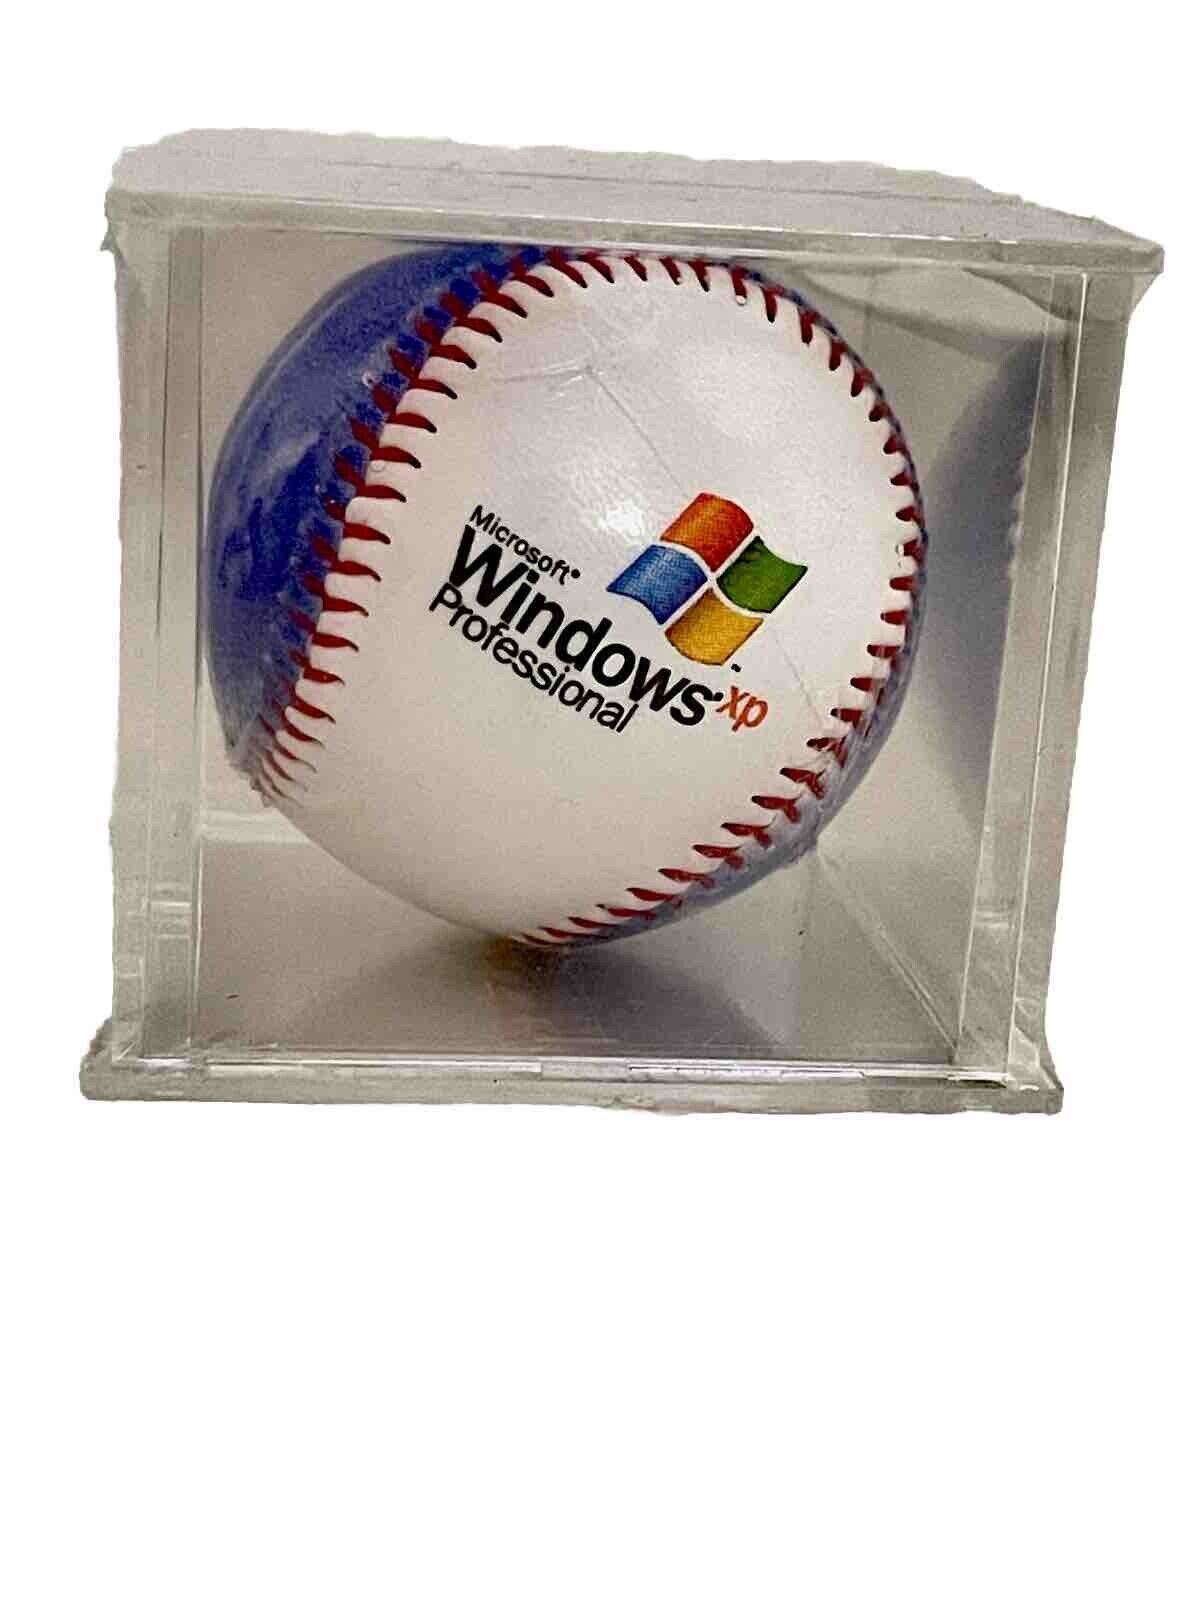 Windows XP Pro Collectors Baseball VTG In Sealed Case - Never Opened